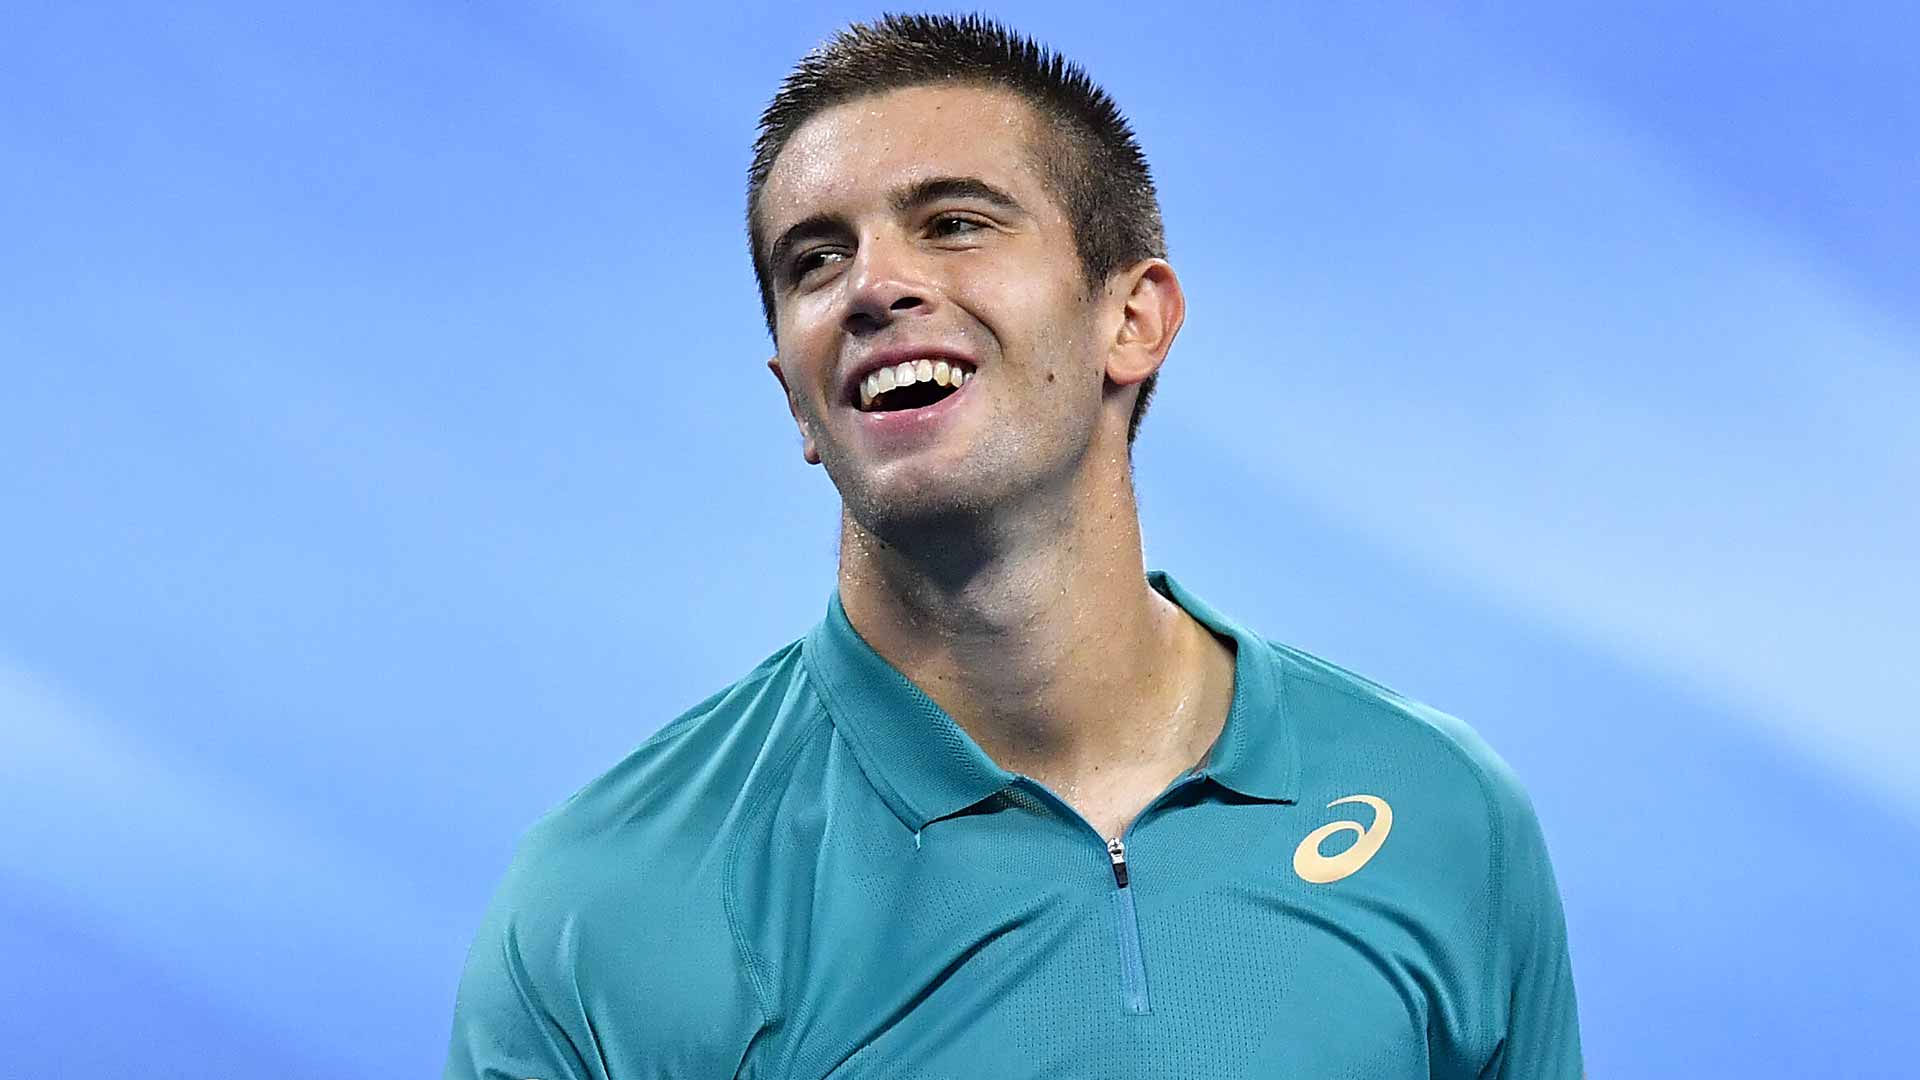 Borna Coric has climbed as high as No. 12 in the FedEx ATP Rankings.